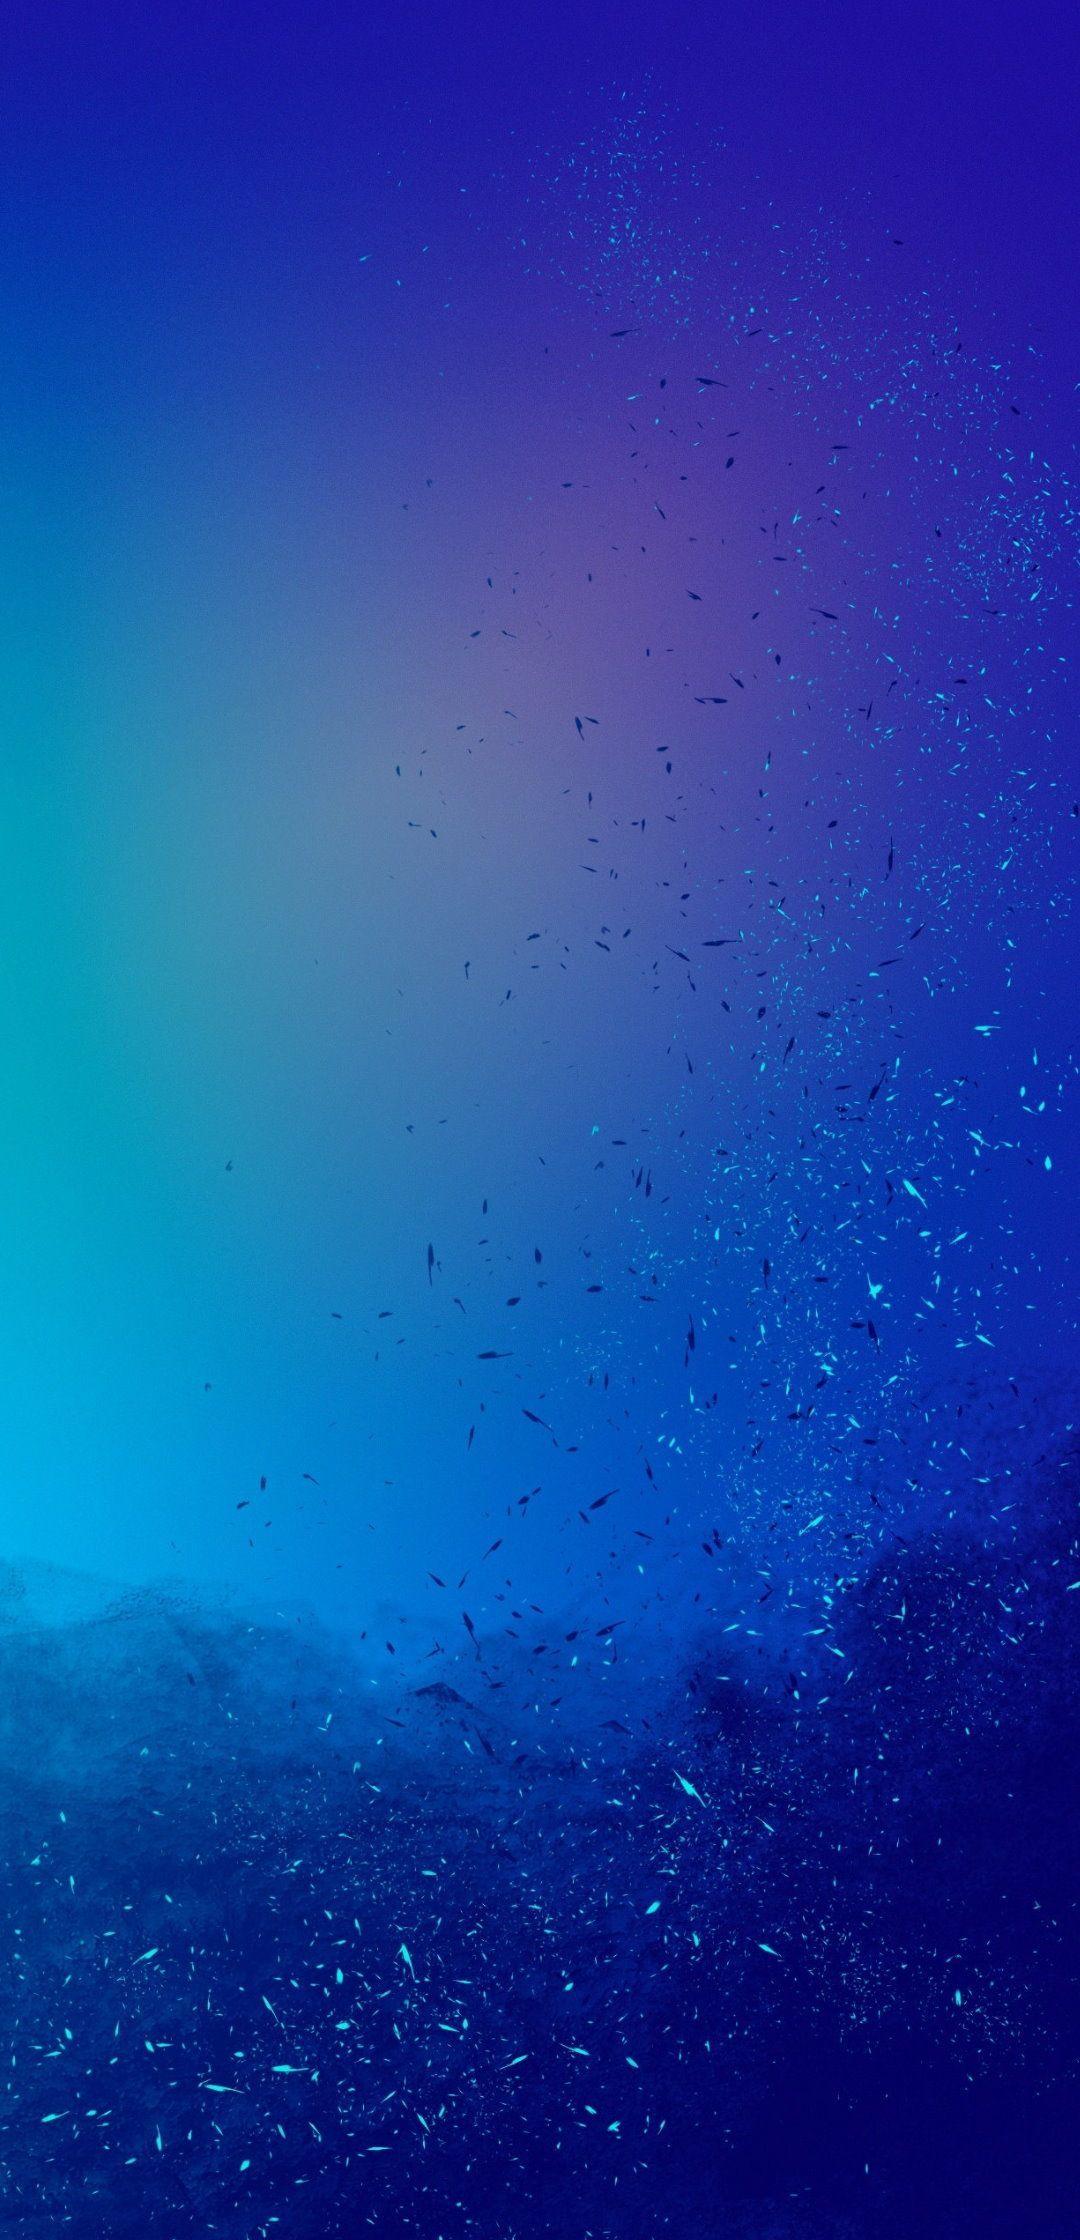 HUAWEI P30 Pro Wallpapers - Wallpaper Cave